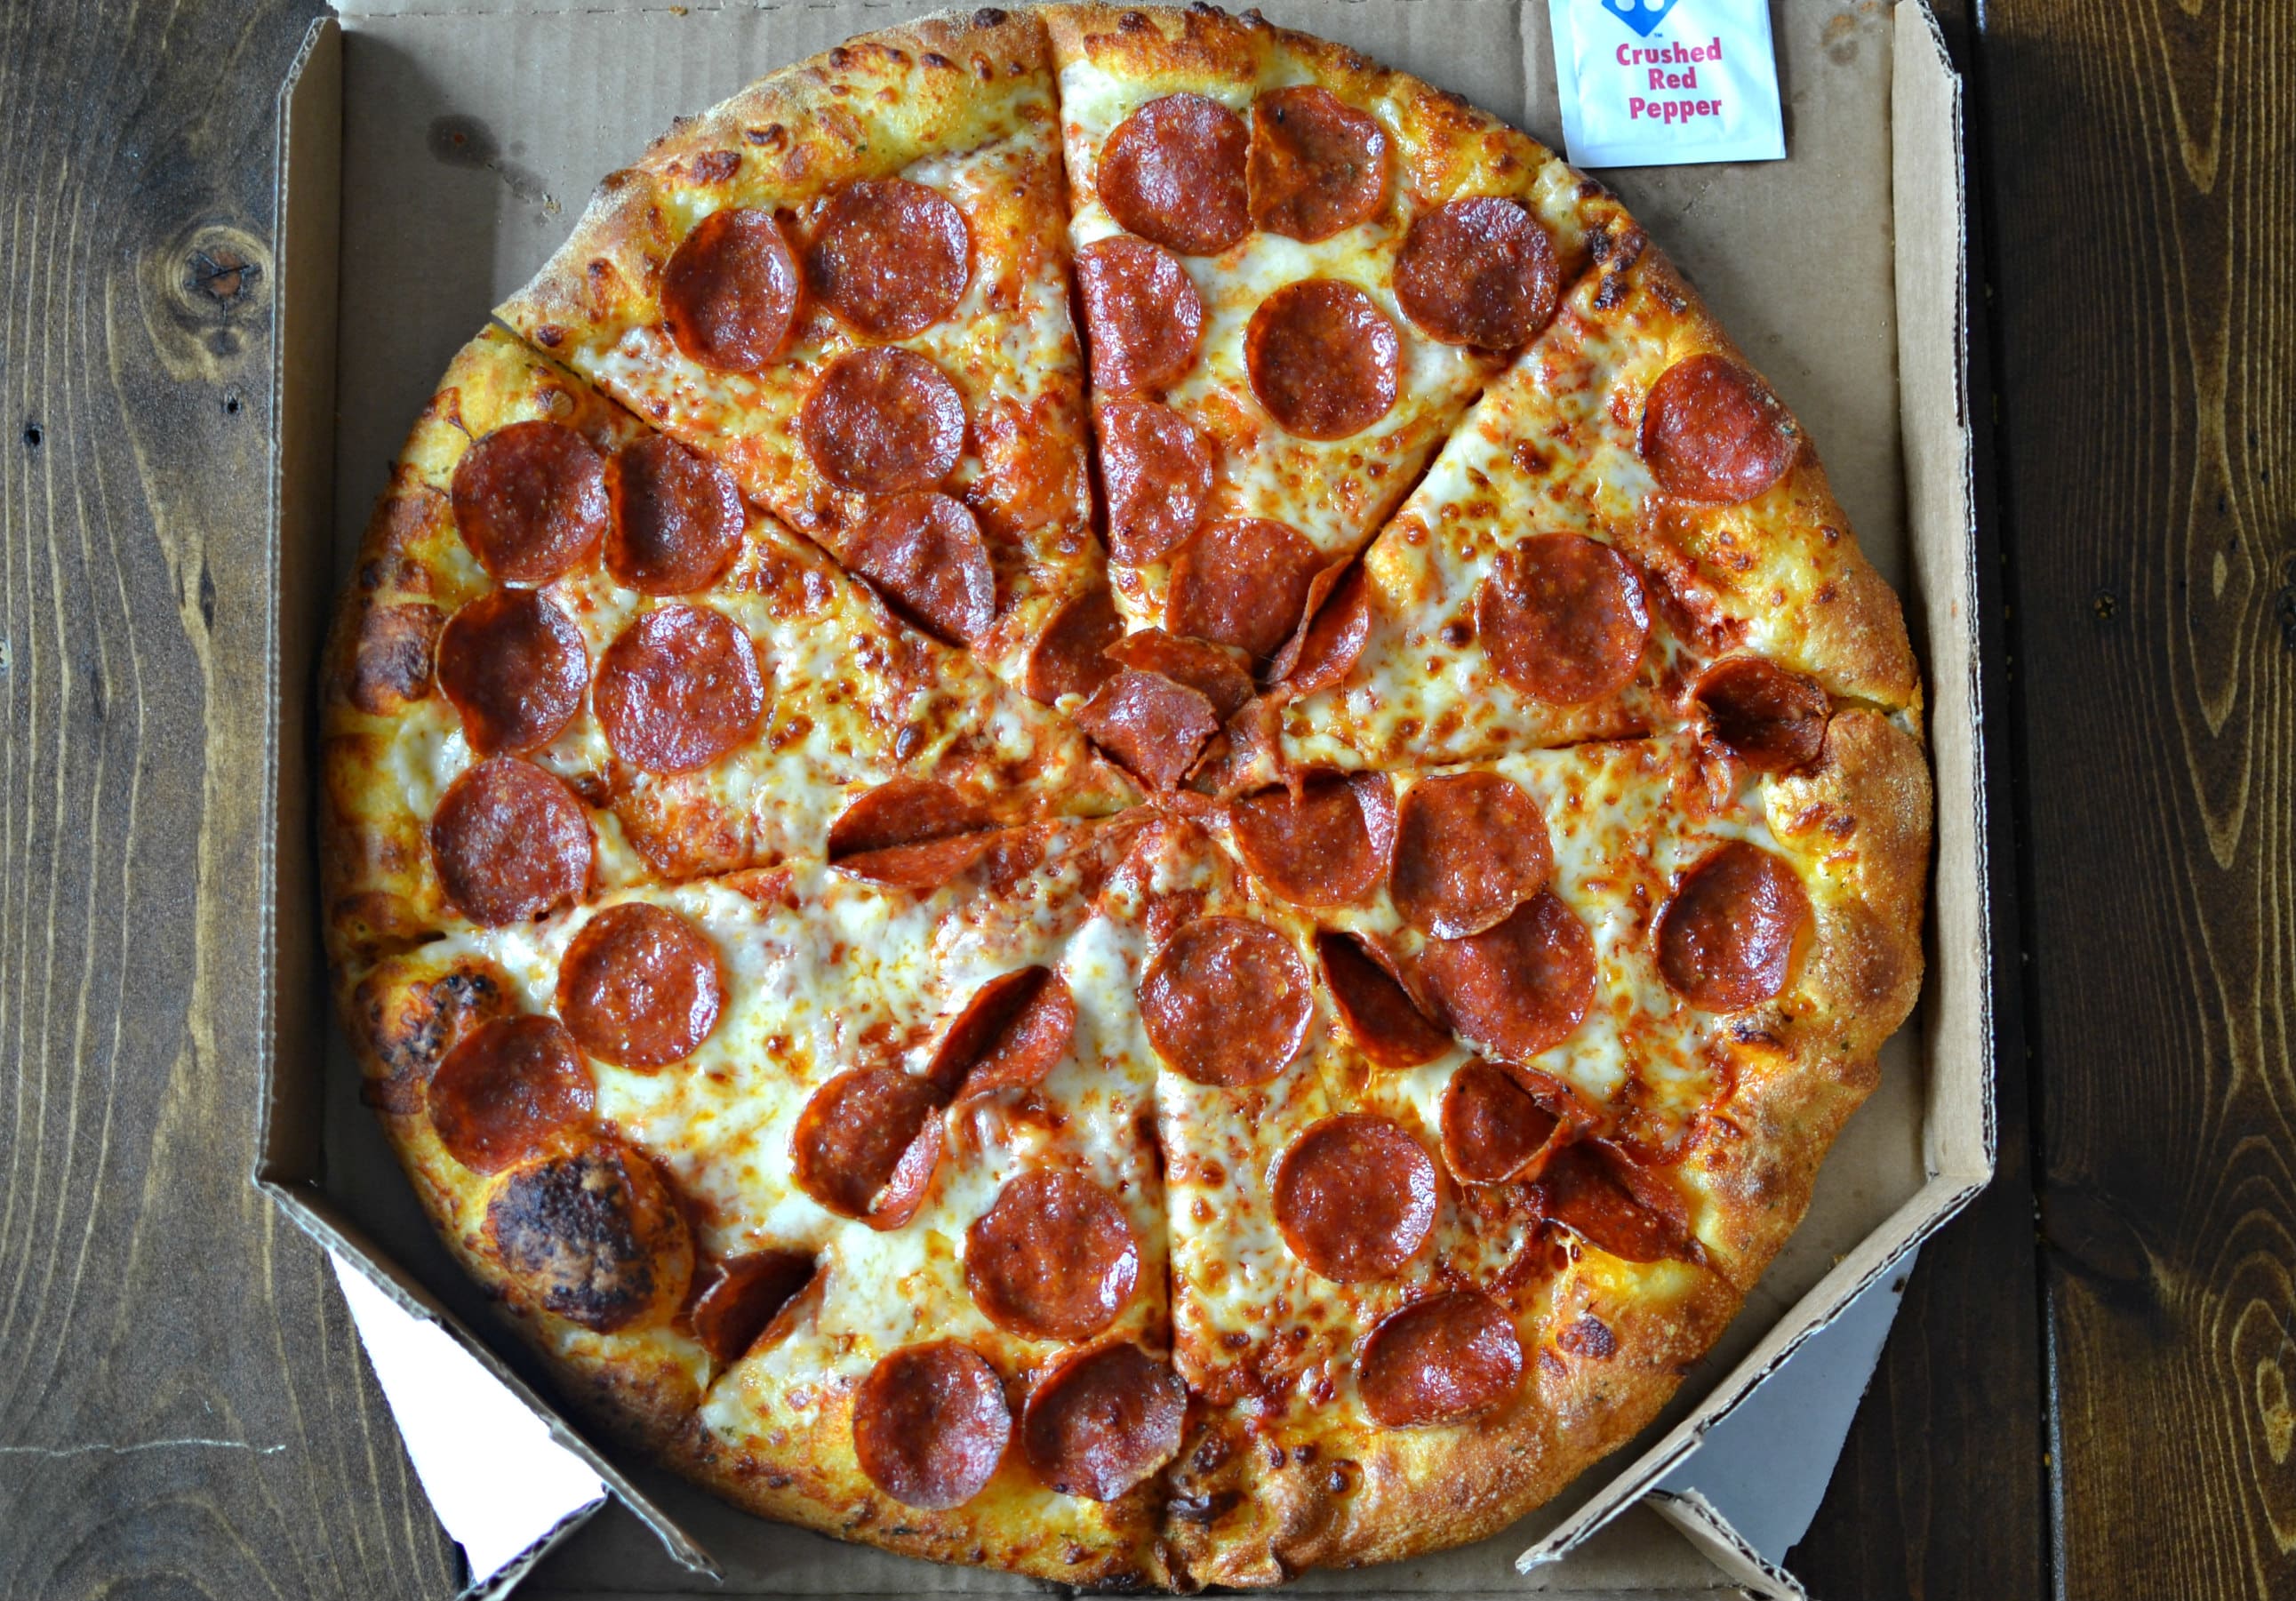 Domino's Vs. Pizza Hut: Crowning the Fast-Food Pizza King | First We ...